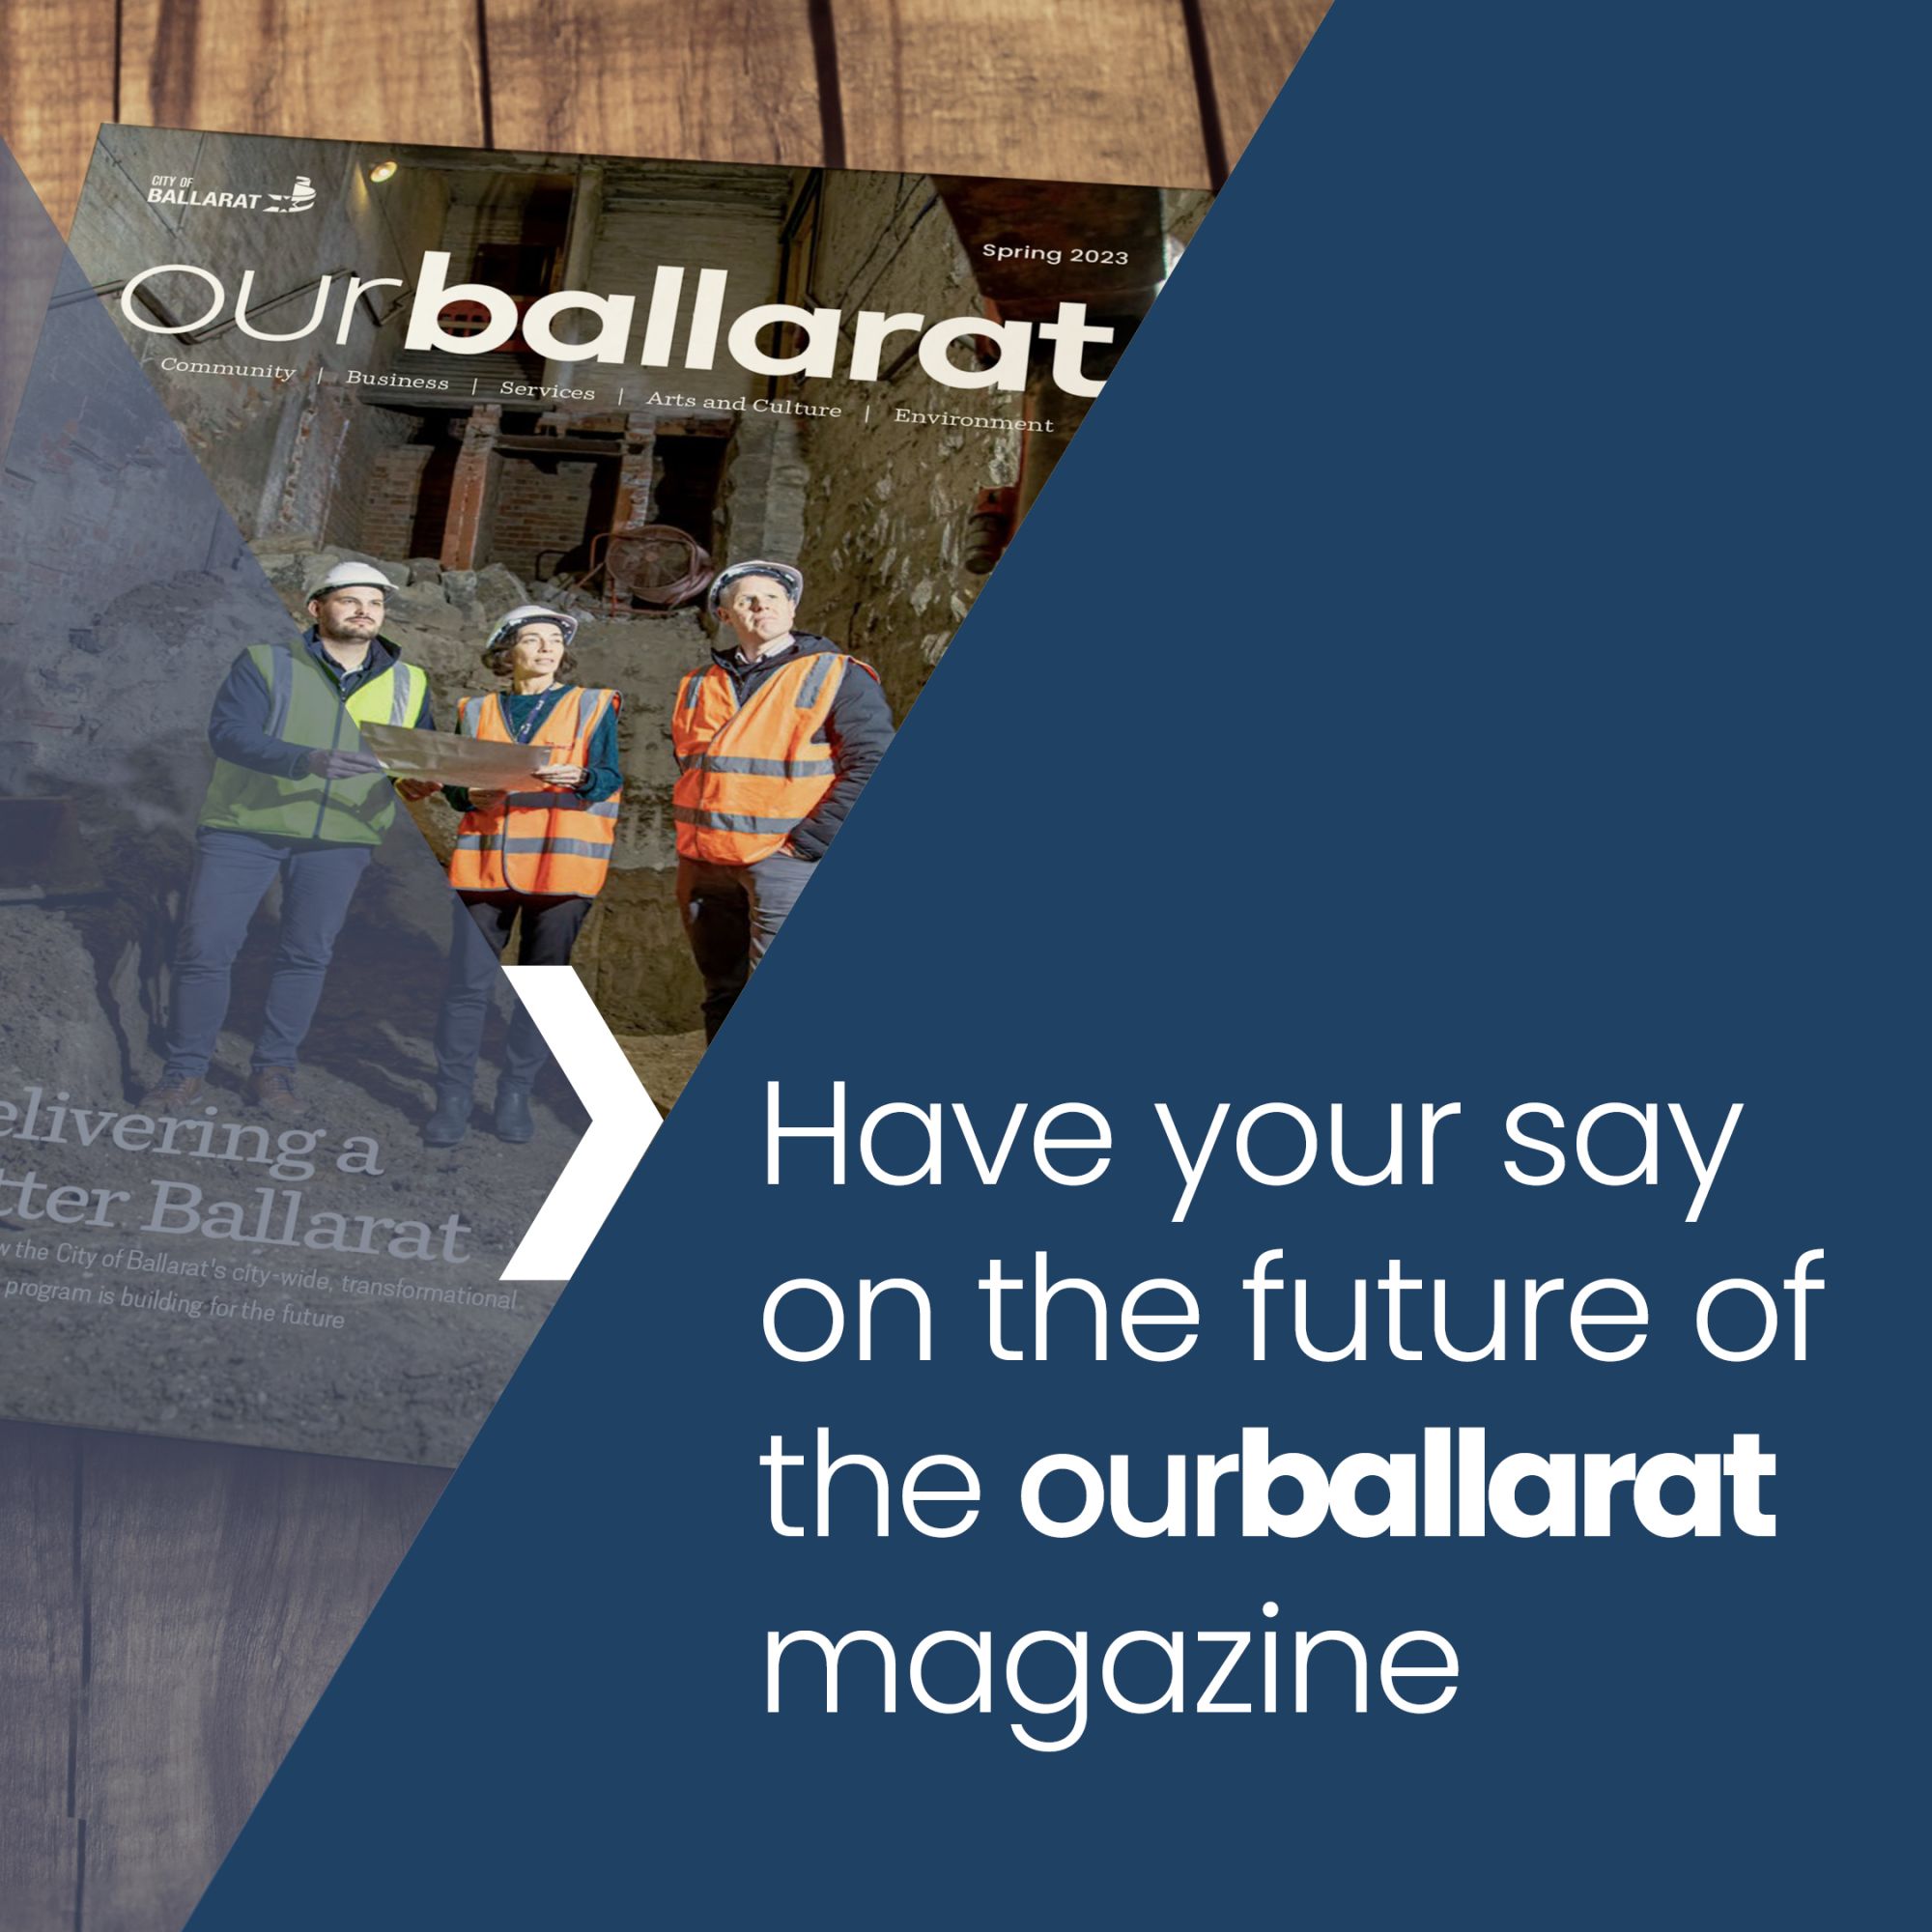 The image says 'Have your say on the future of the ourballarat magazine'. 